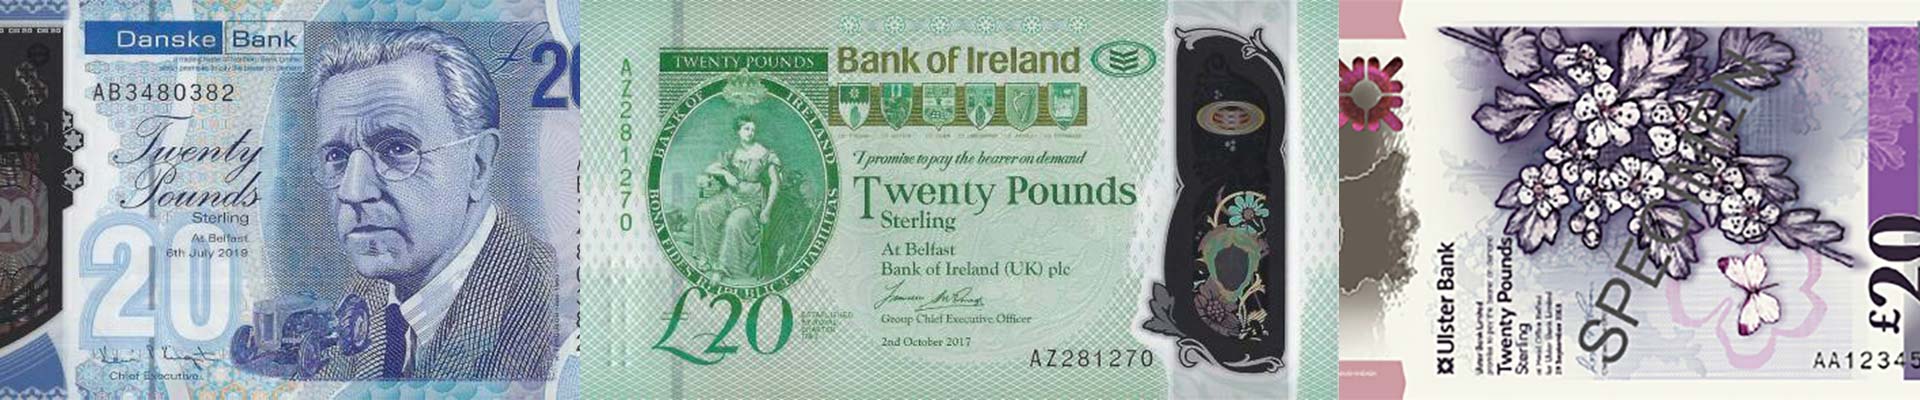 Bank of Ireland,Danske Bank and Ulster Bank to introduce polymer £20 note